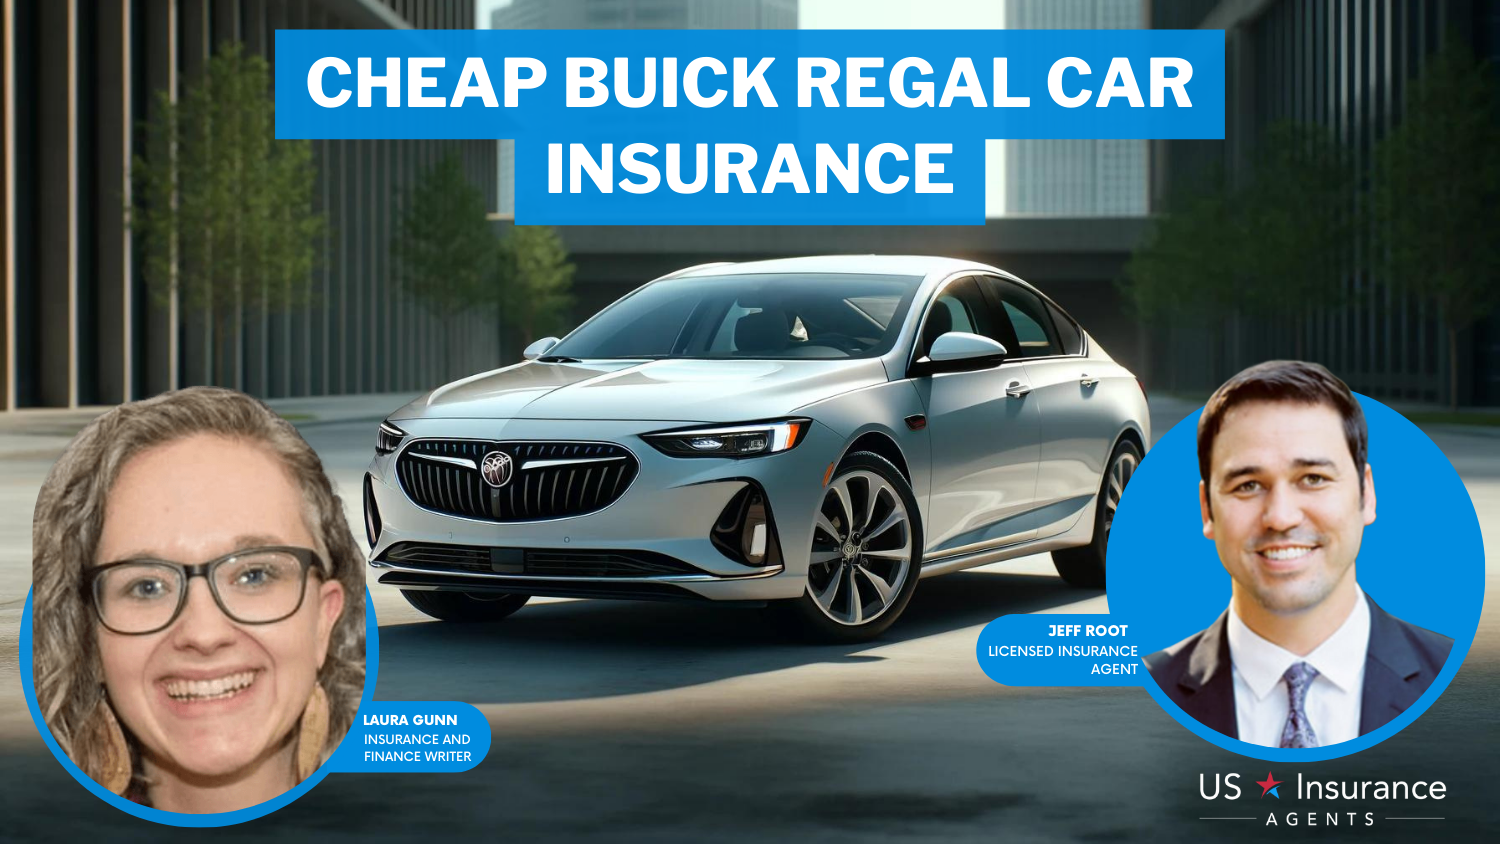 Cheap Buick Regal Car Insurance: Nationwide, The Hartford, and USAA